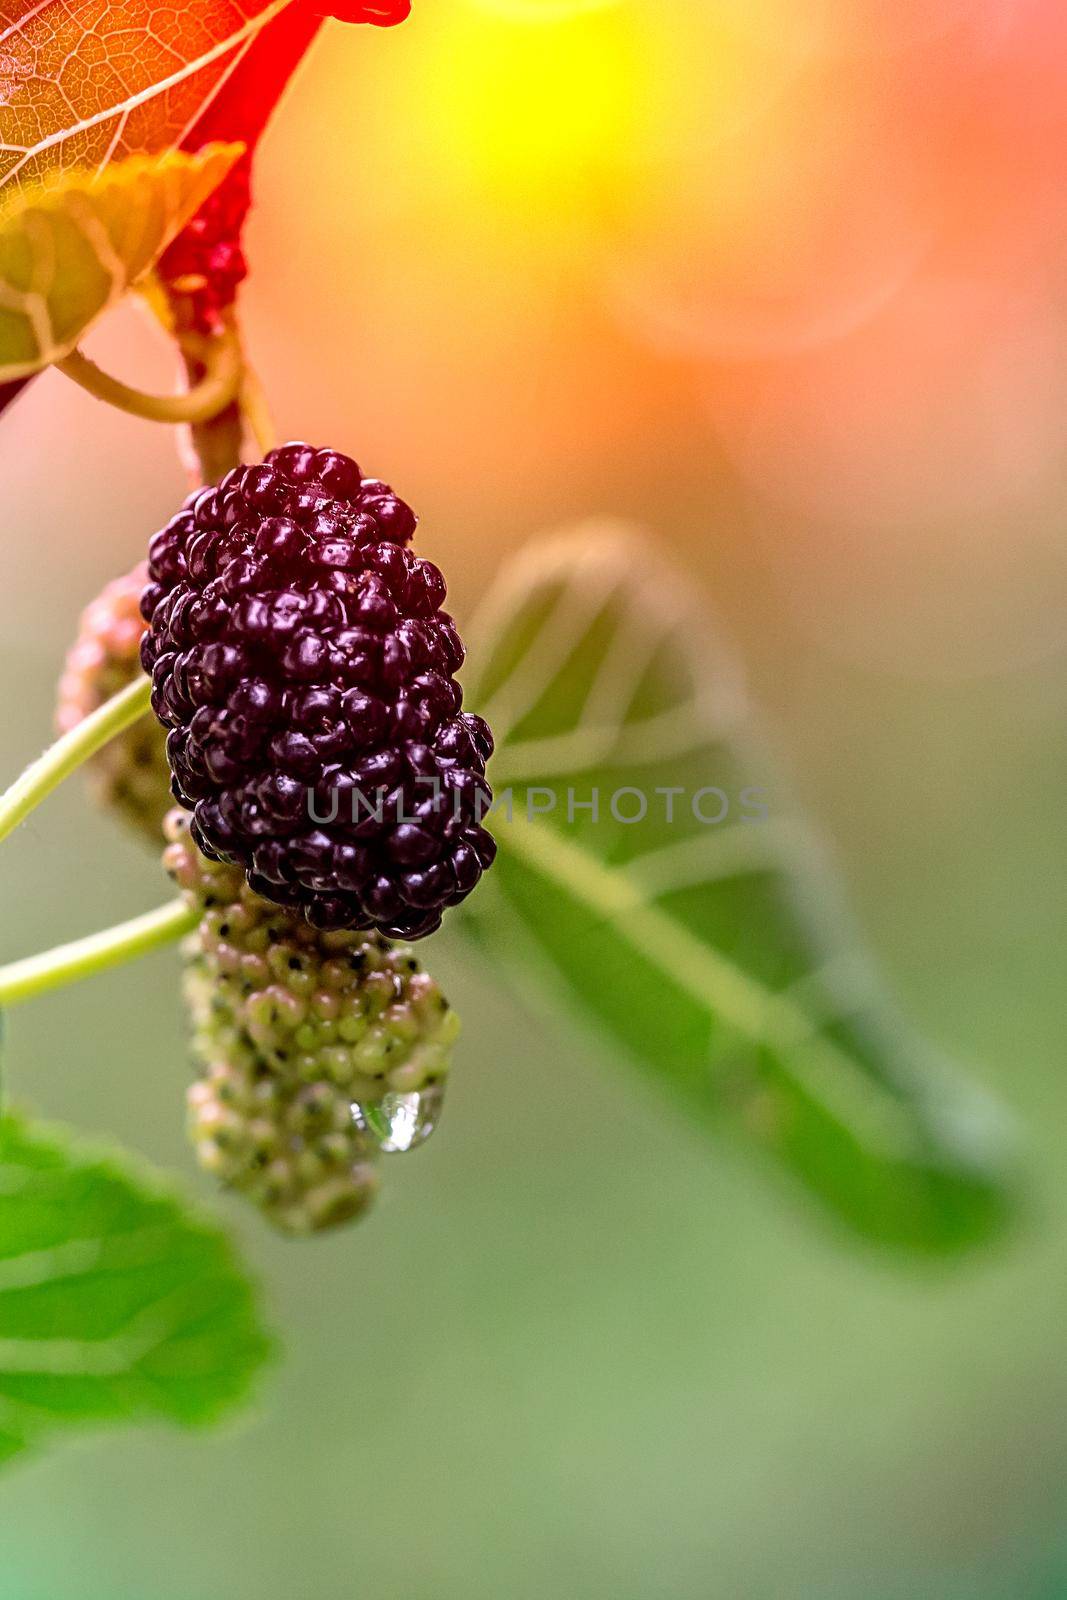 Ripe and green mulberry on a branch, wet berry with drops of water after rain. Close-up view